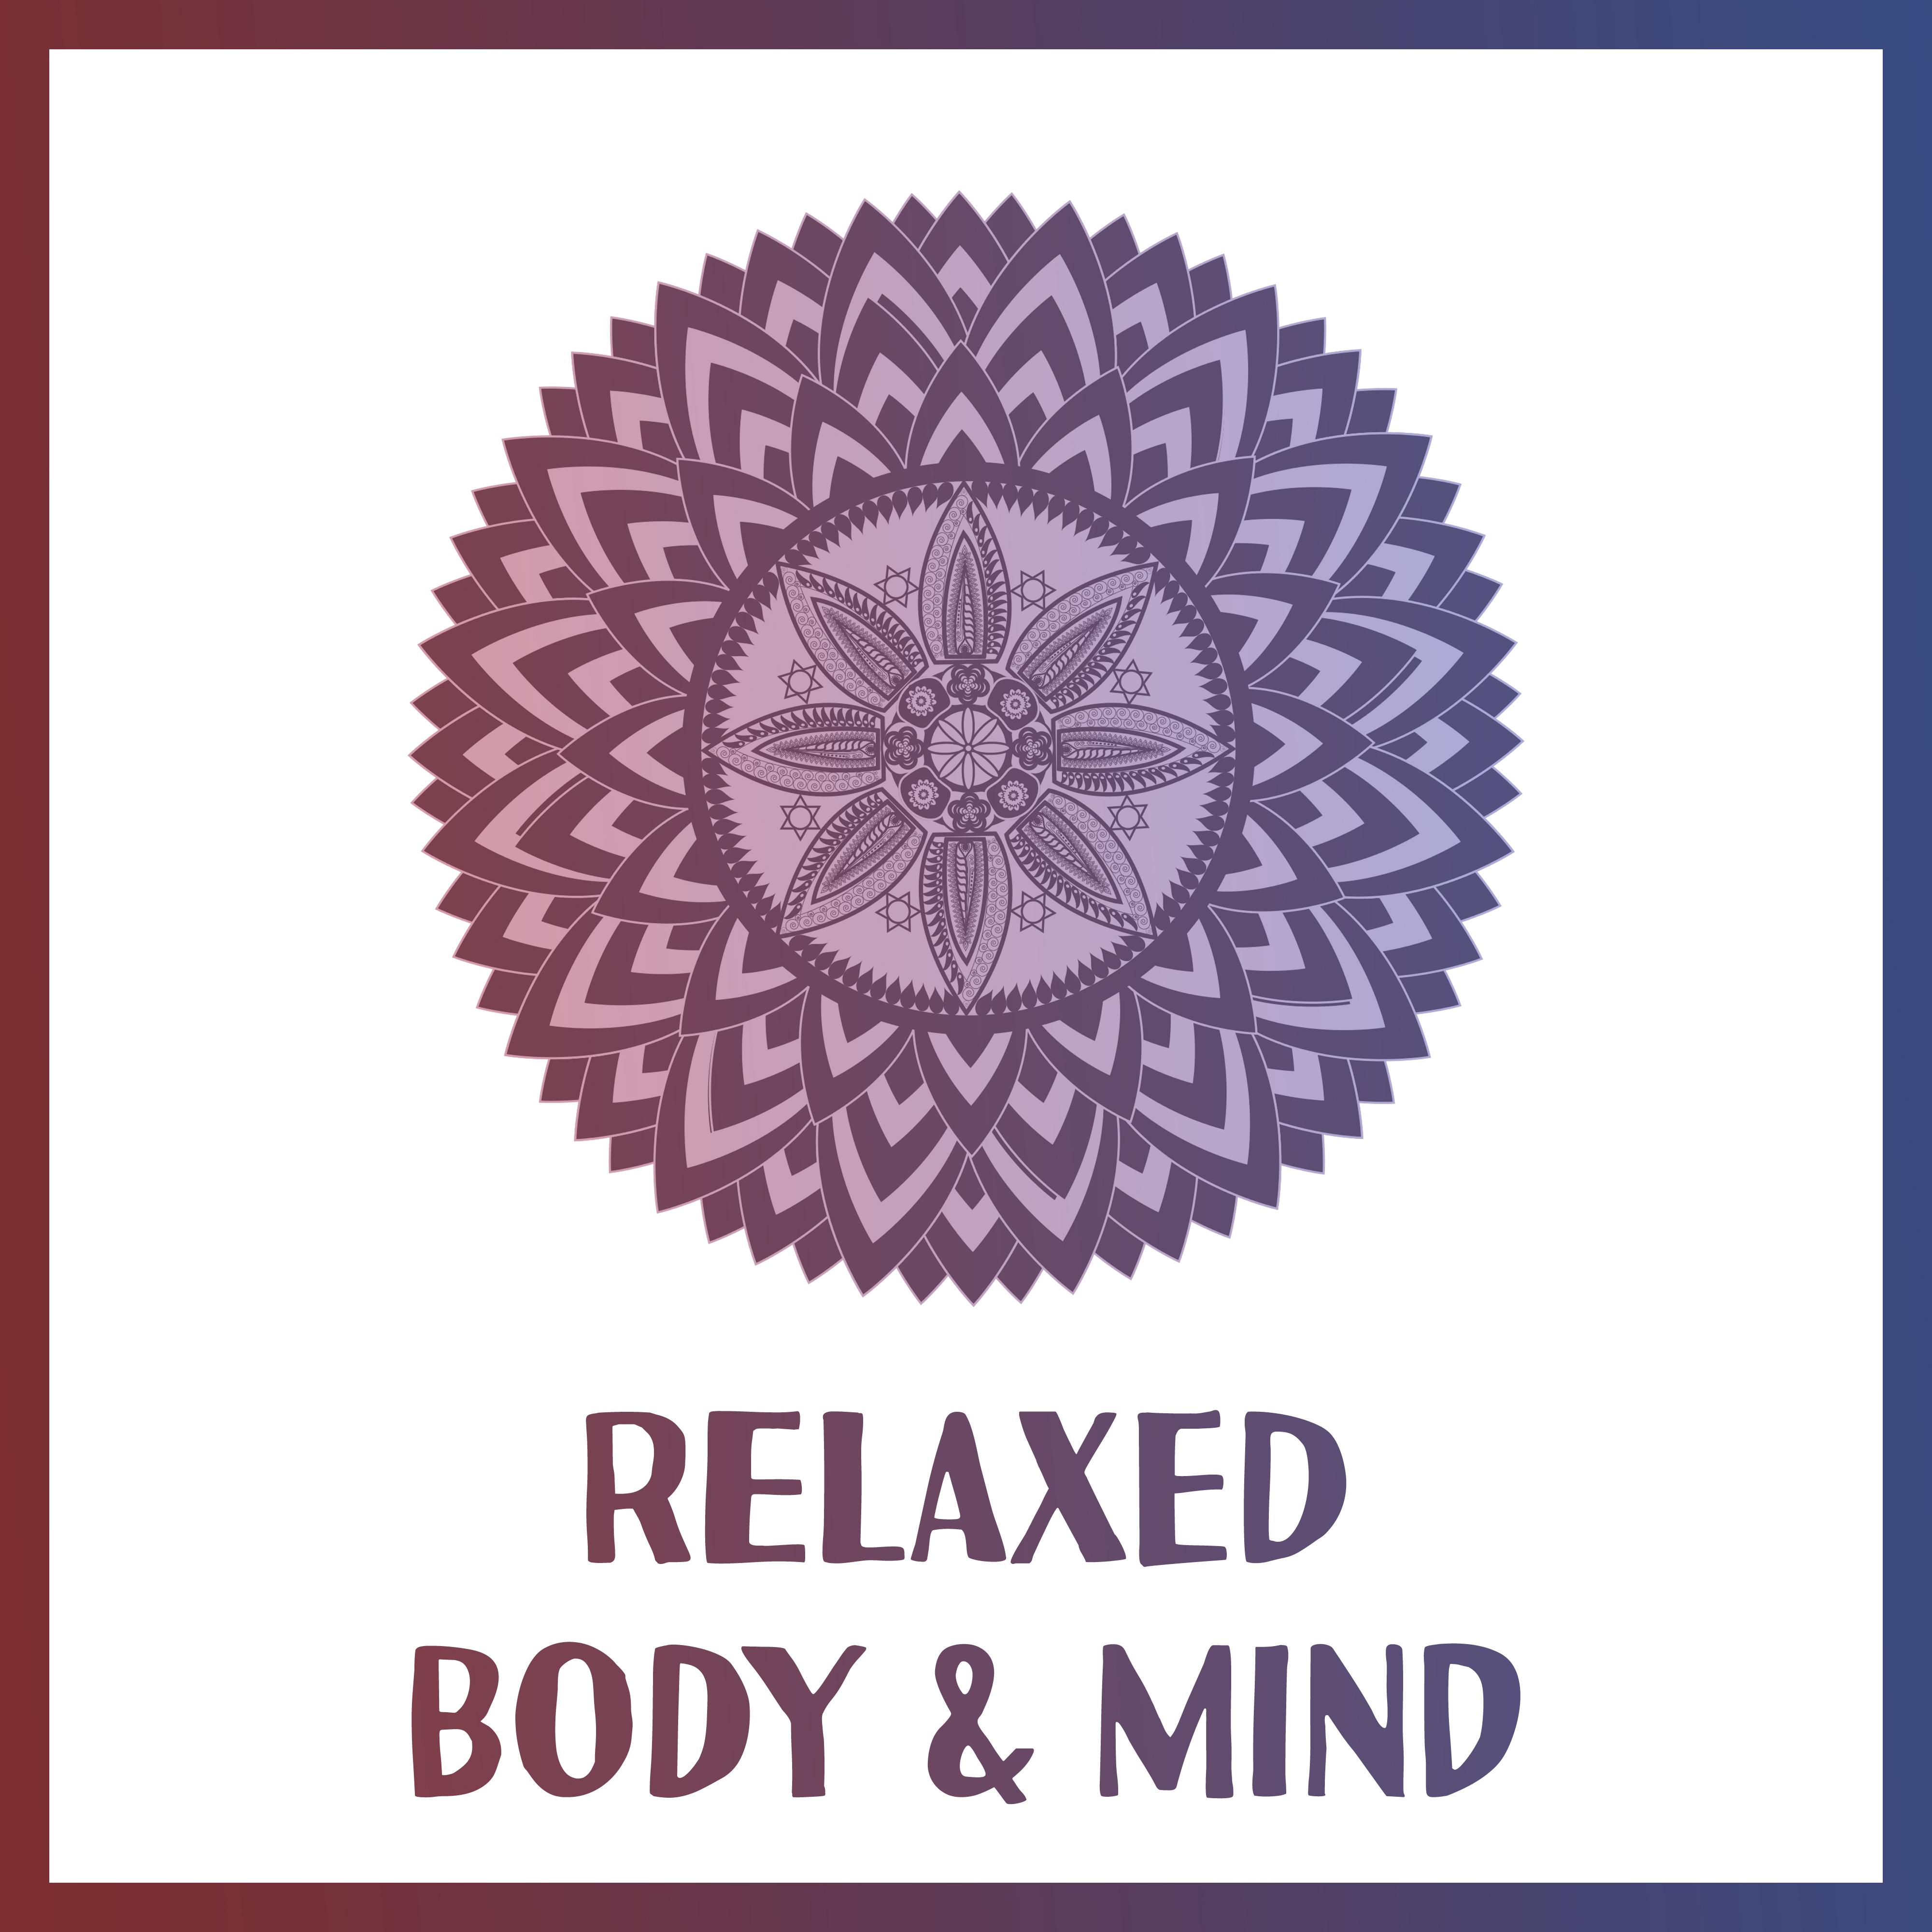 Relaxed Body  Mind  Yoga Music, New Age for Meditation, Pilates, Stress Relief, Rest  Relax